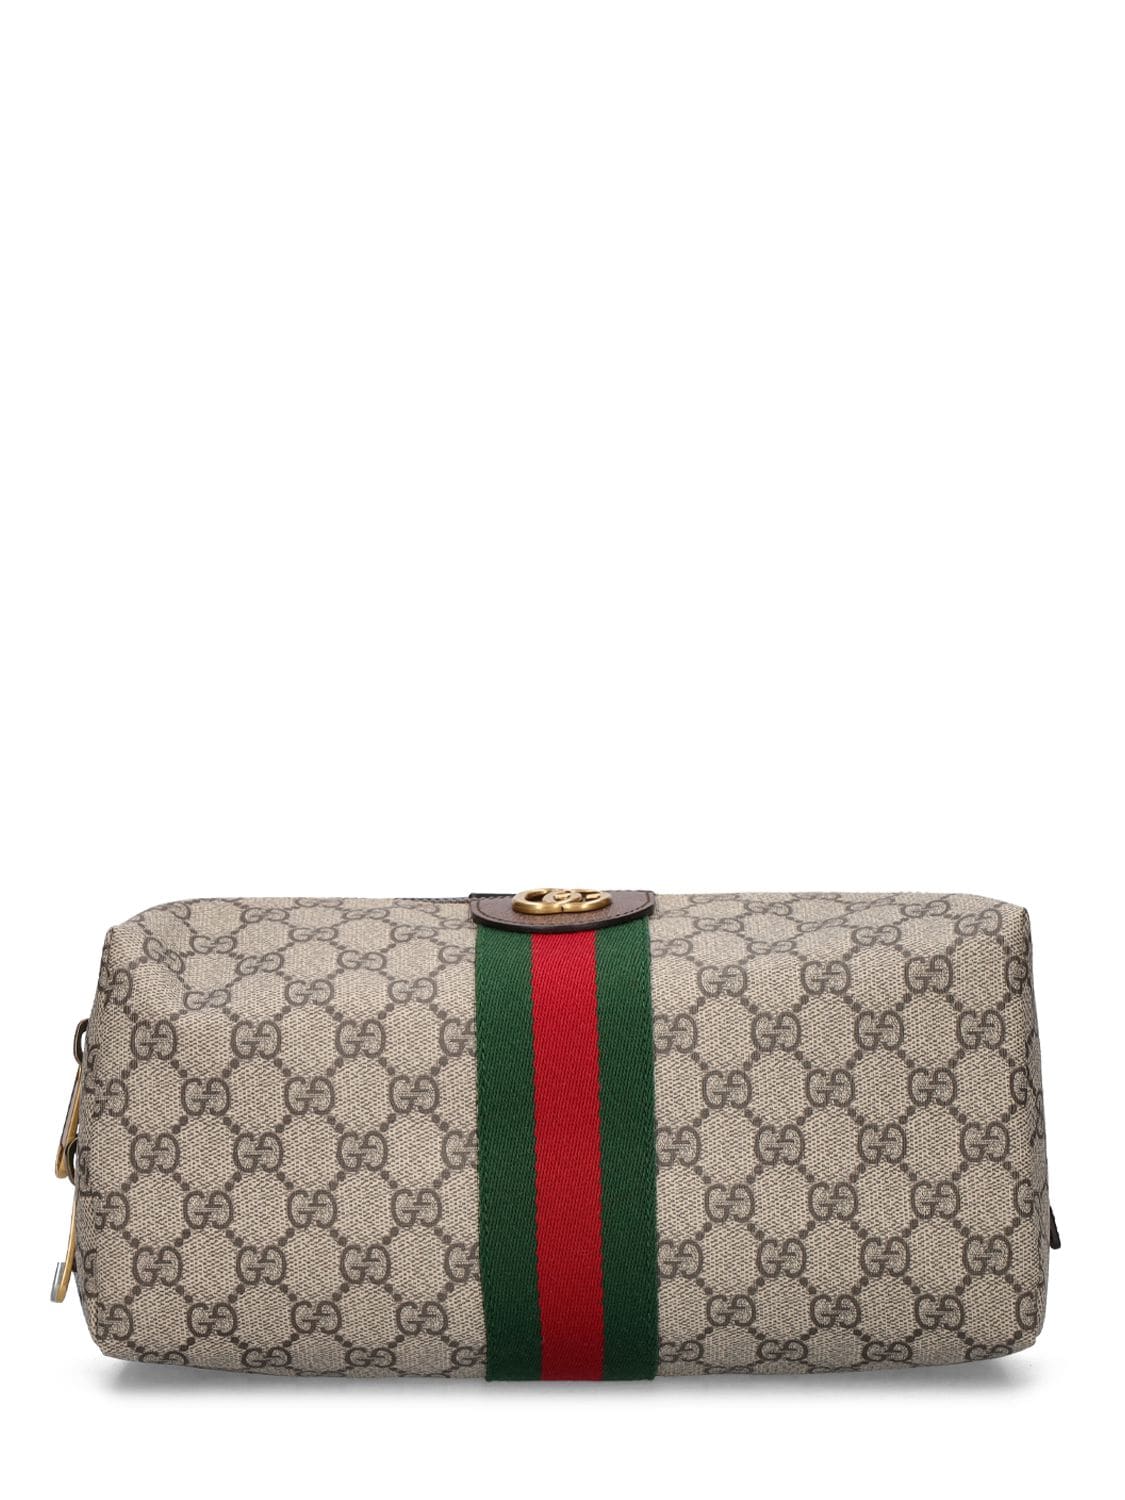 The Gucci Savoy Canvas Toiletry Bag